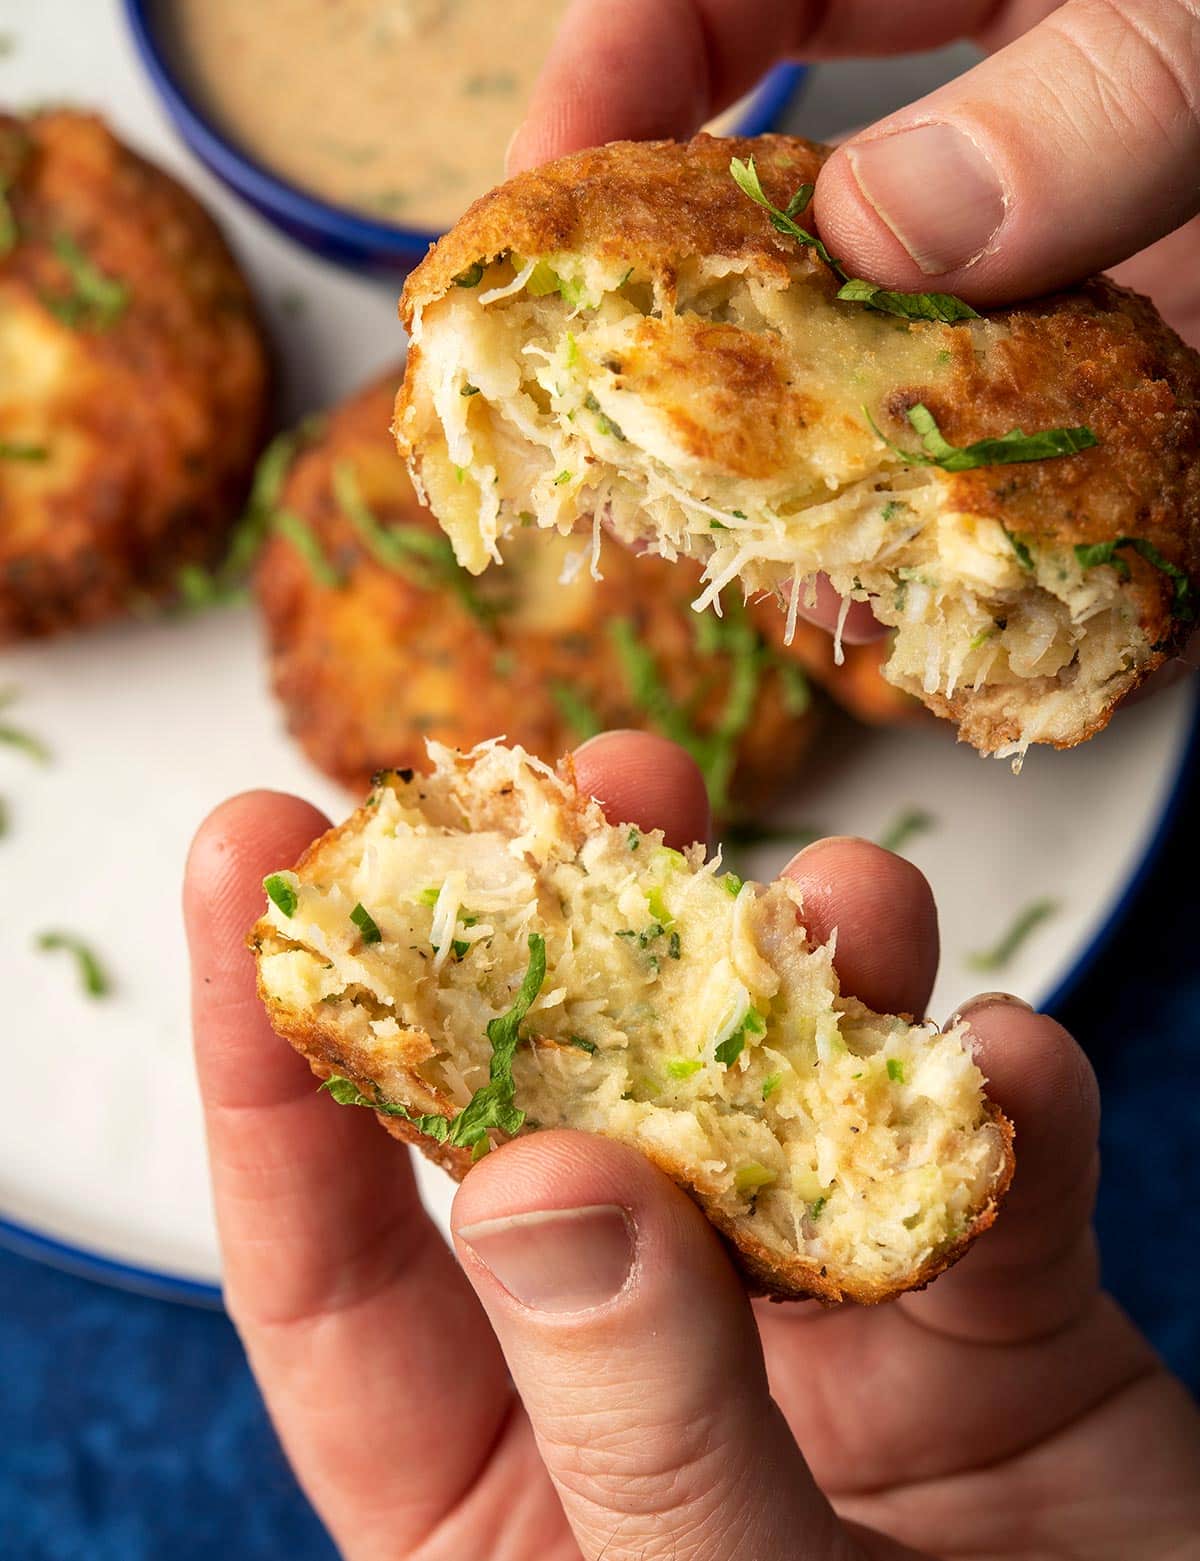 Breaking open a potato fish cake that has some crab in it. 